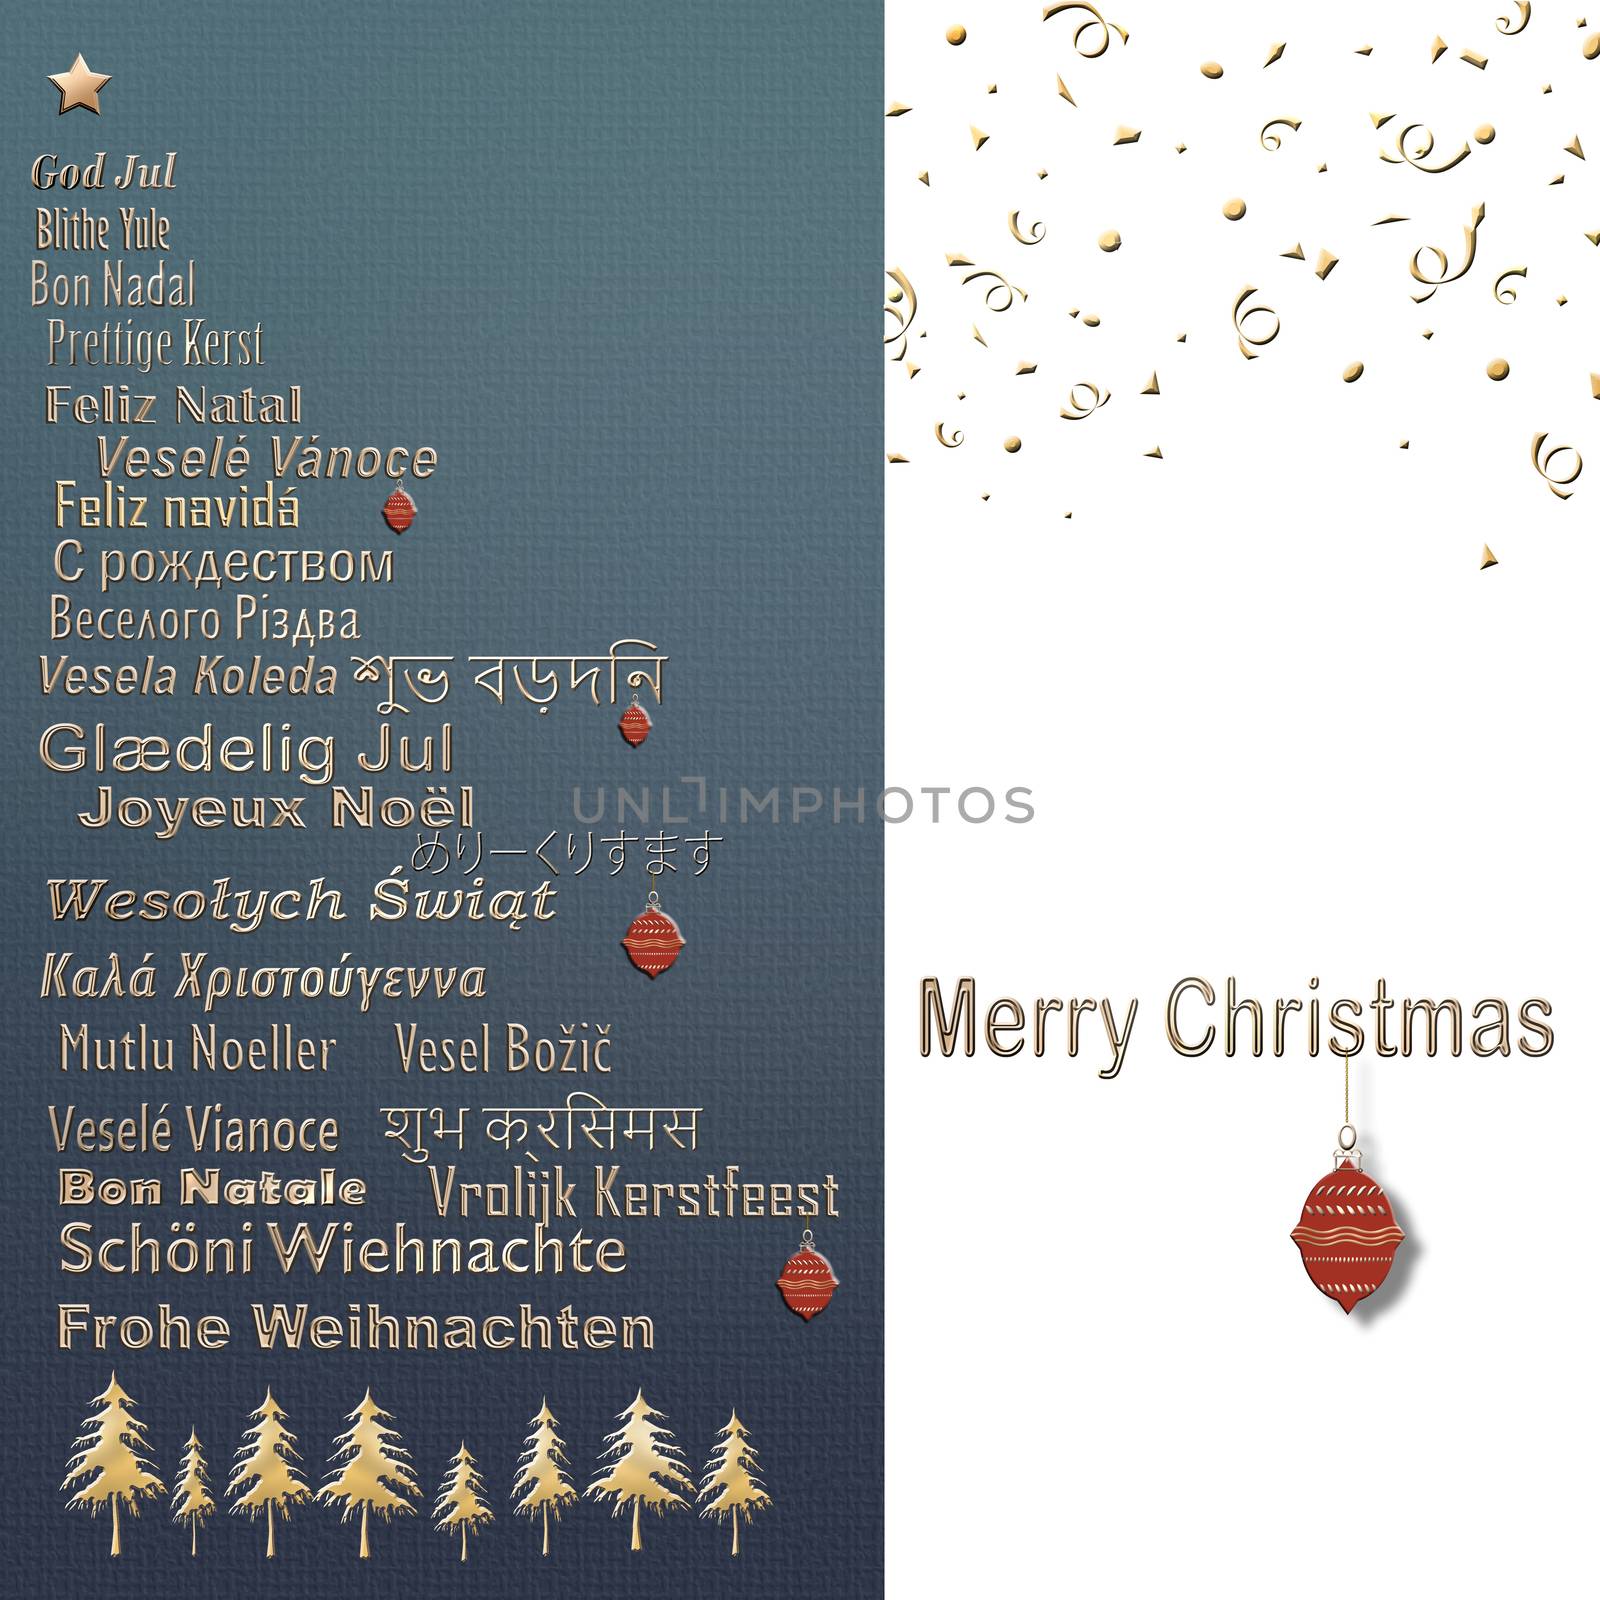 TEXT Merry Christmas in Different European, Eastern European, Hindi, Bengali, Indian, Japanese Languages forming Christmas Tree with red balls, gold confetti on white blue background. 3D illustration